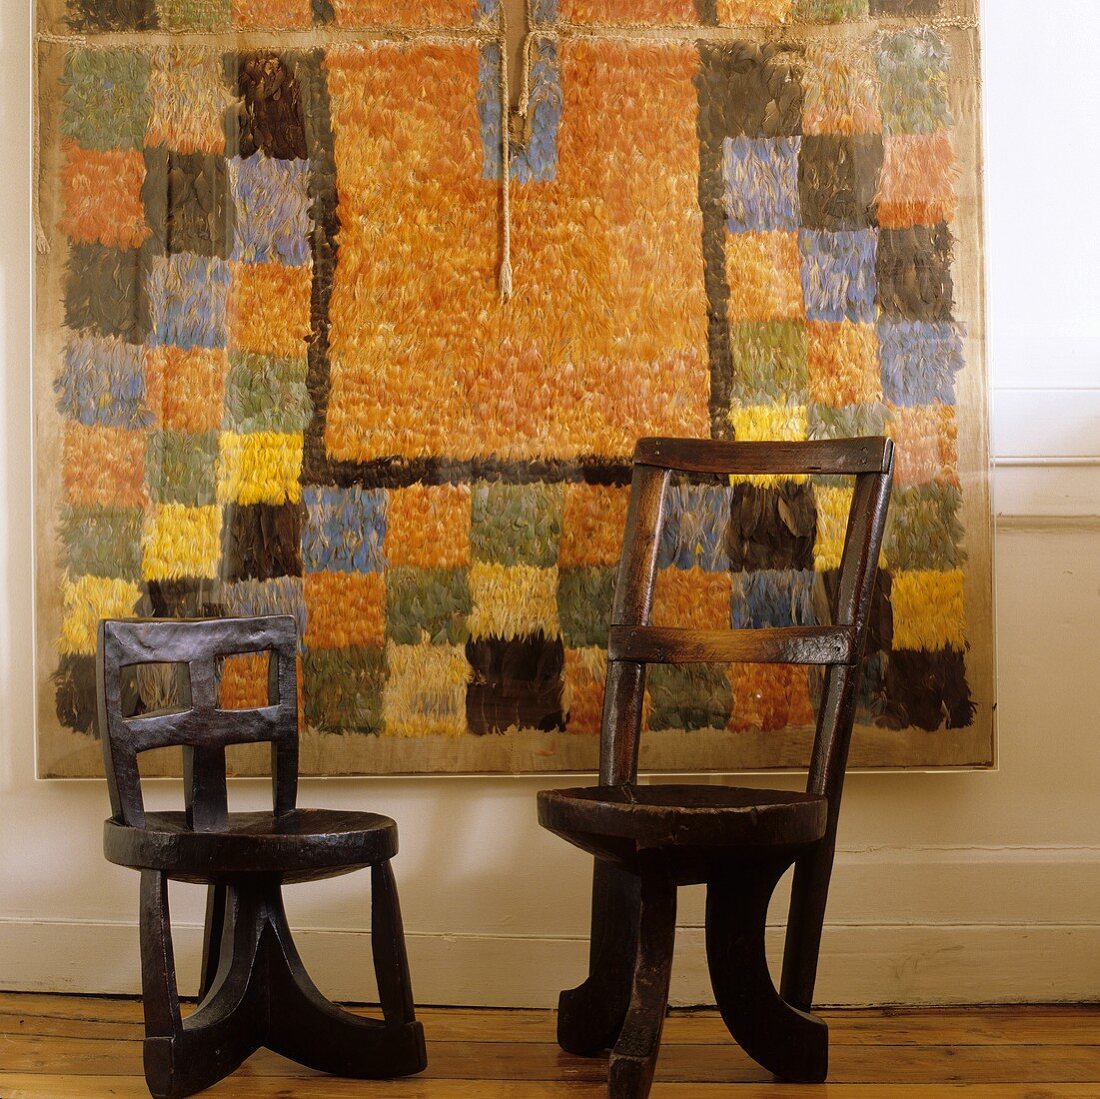 Wooden African chairs in front of a modern wall rug